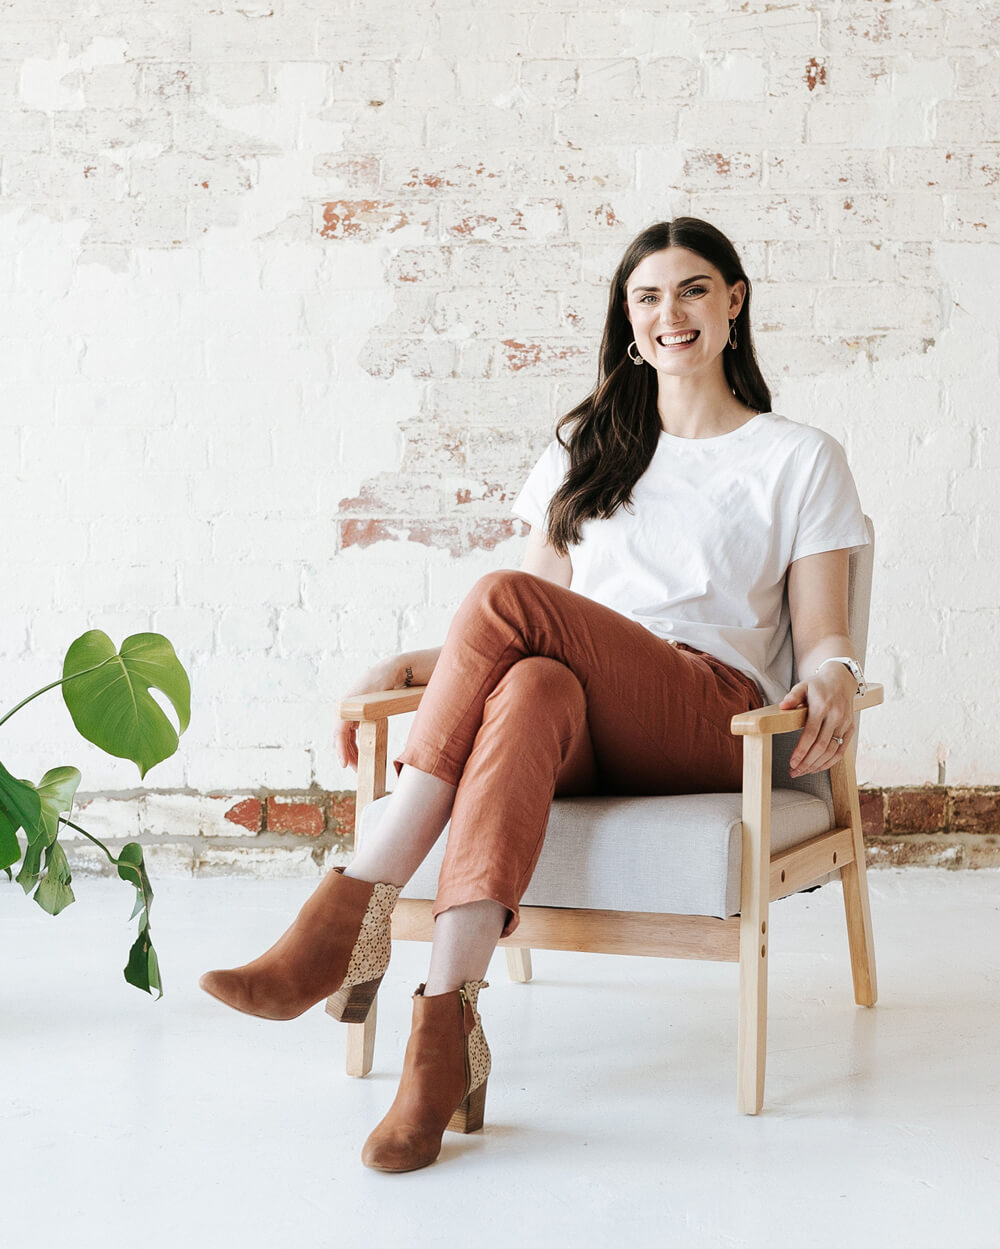 Kaity Griffin Google Ads expert smiling white sitting in a chair with legs crossed